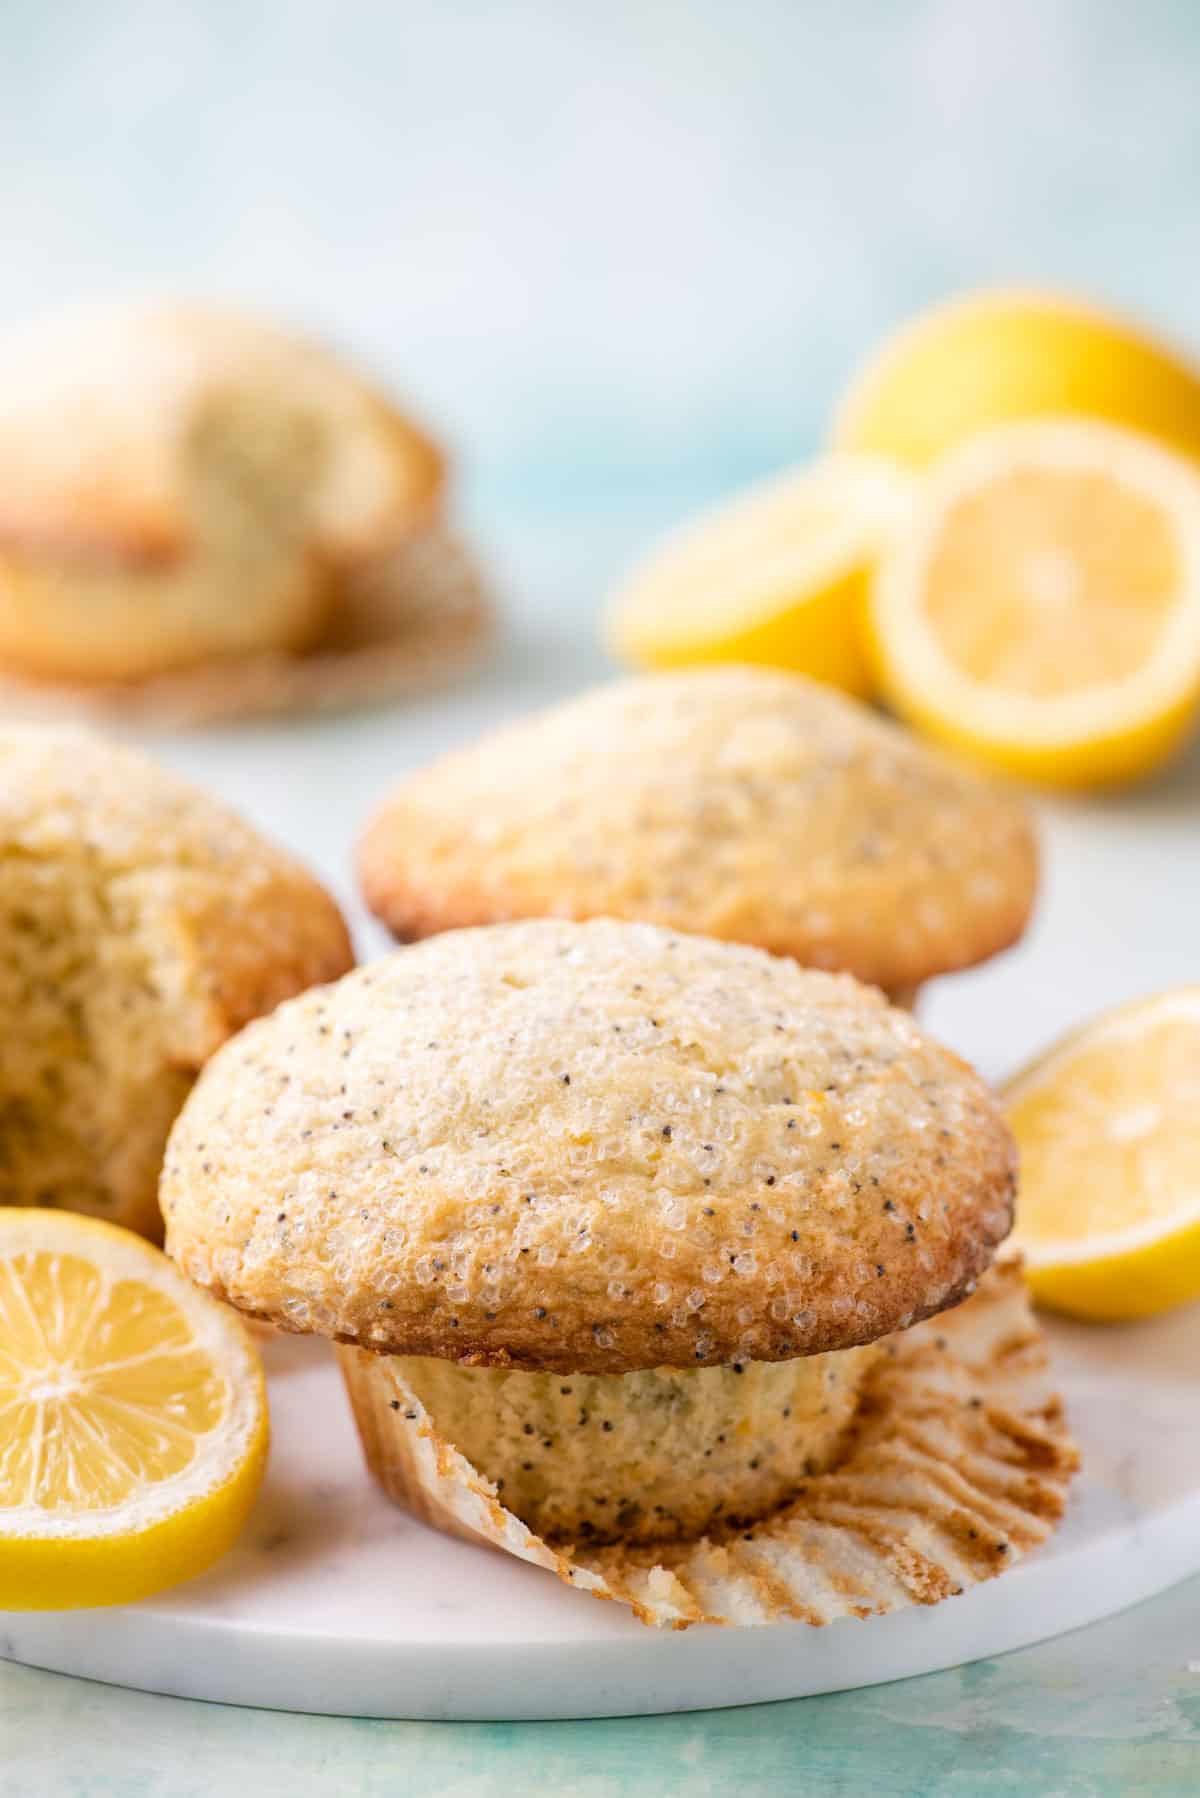 lemon poppy seed muffin on a white plate with muffin paper partially pulled off surrounded by more muffins and lemon slices